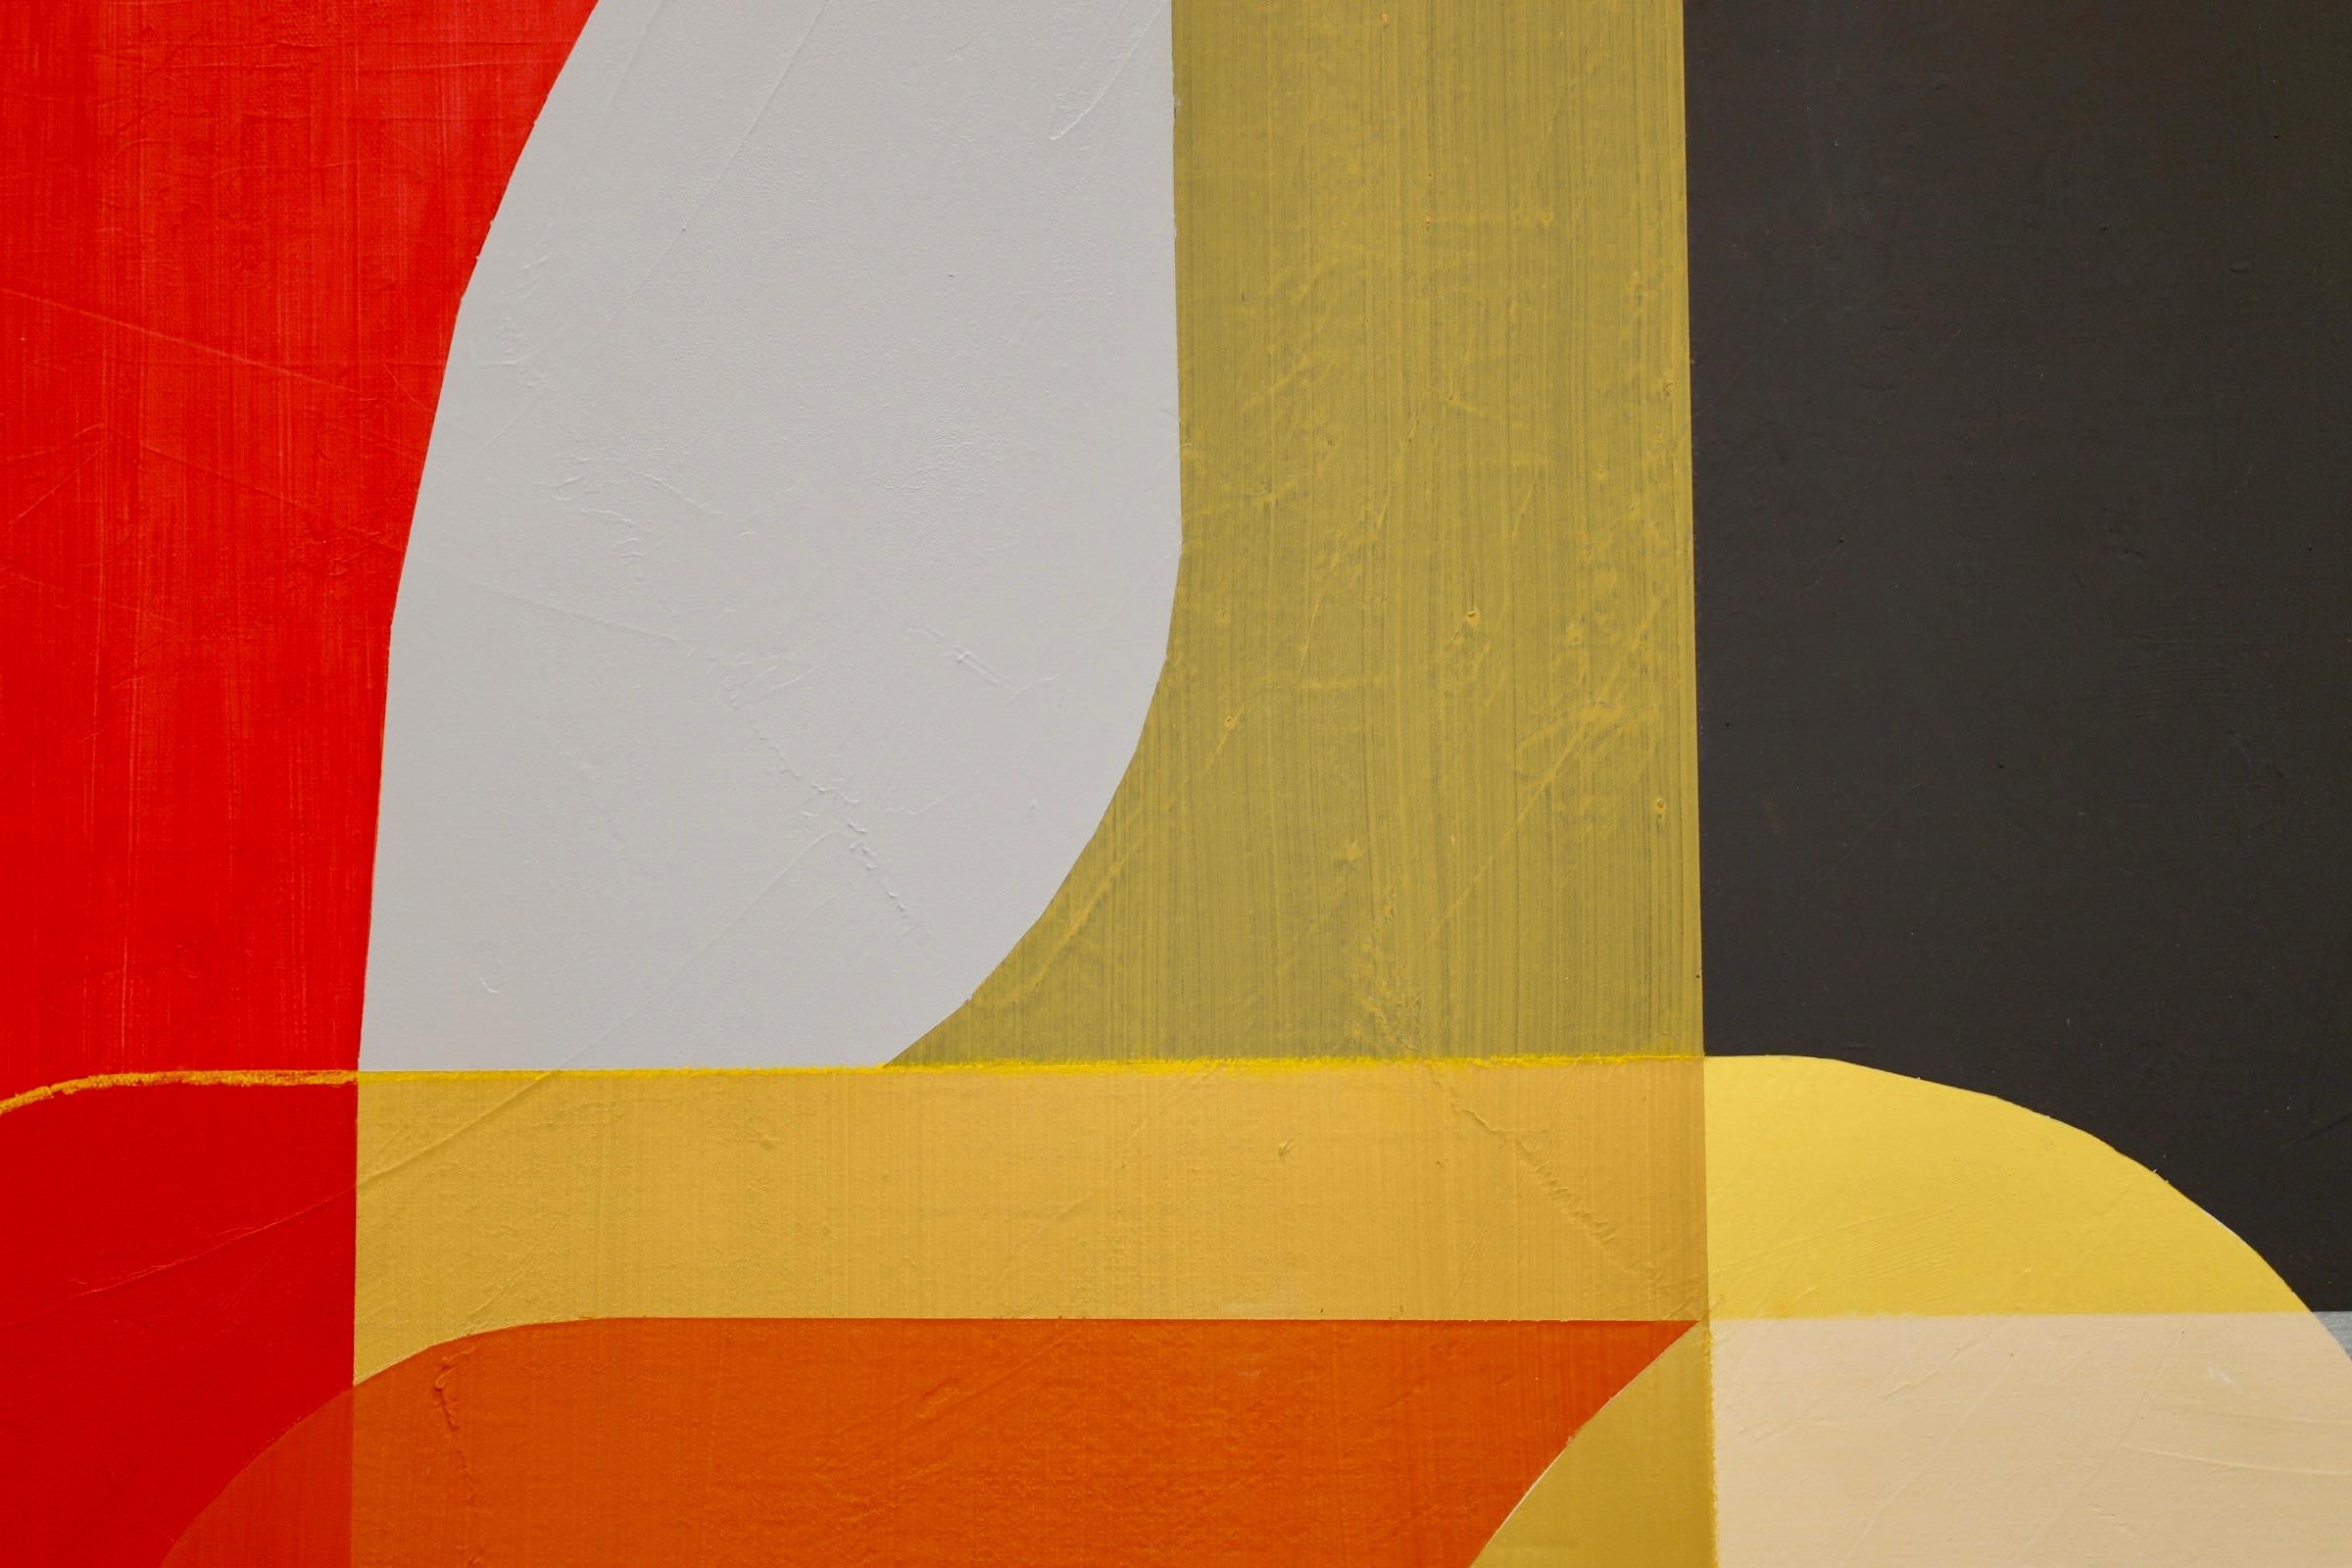 In Tricia Strickfaden’s painting, a fusion of abstraction and color unfolds before the viewer. With a nuanced understanding of mid-century modernist design principles and a mastery of color theory, Strickfaden orchestrates a composition that